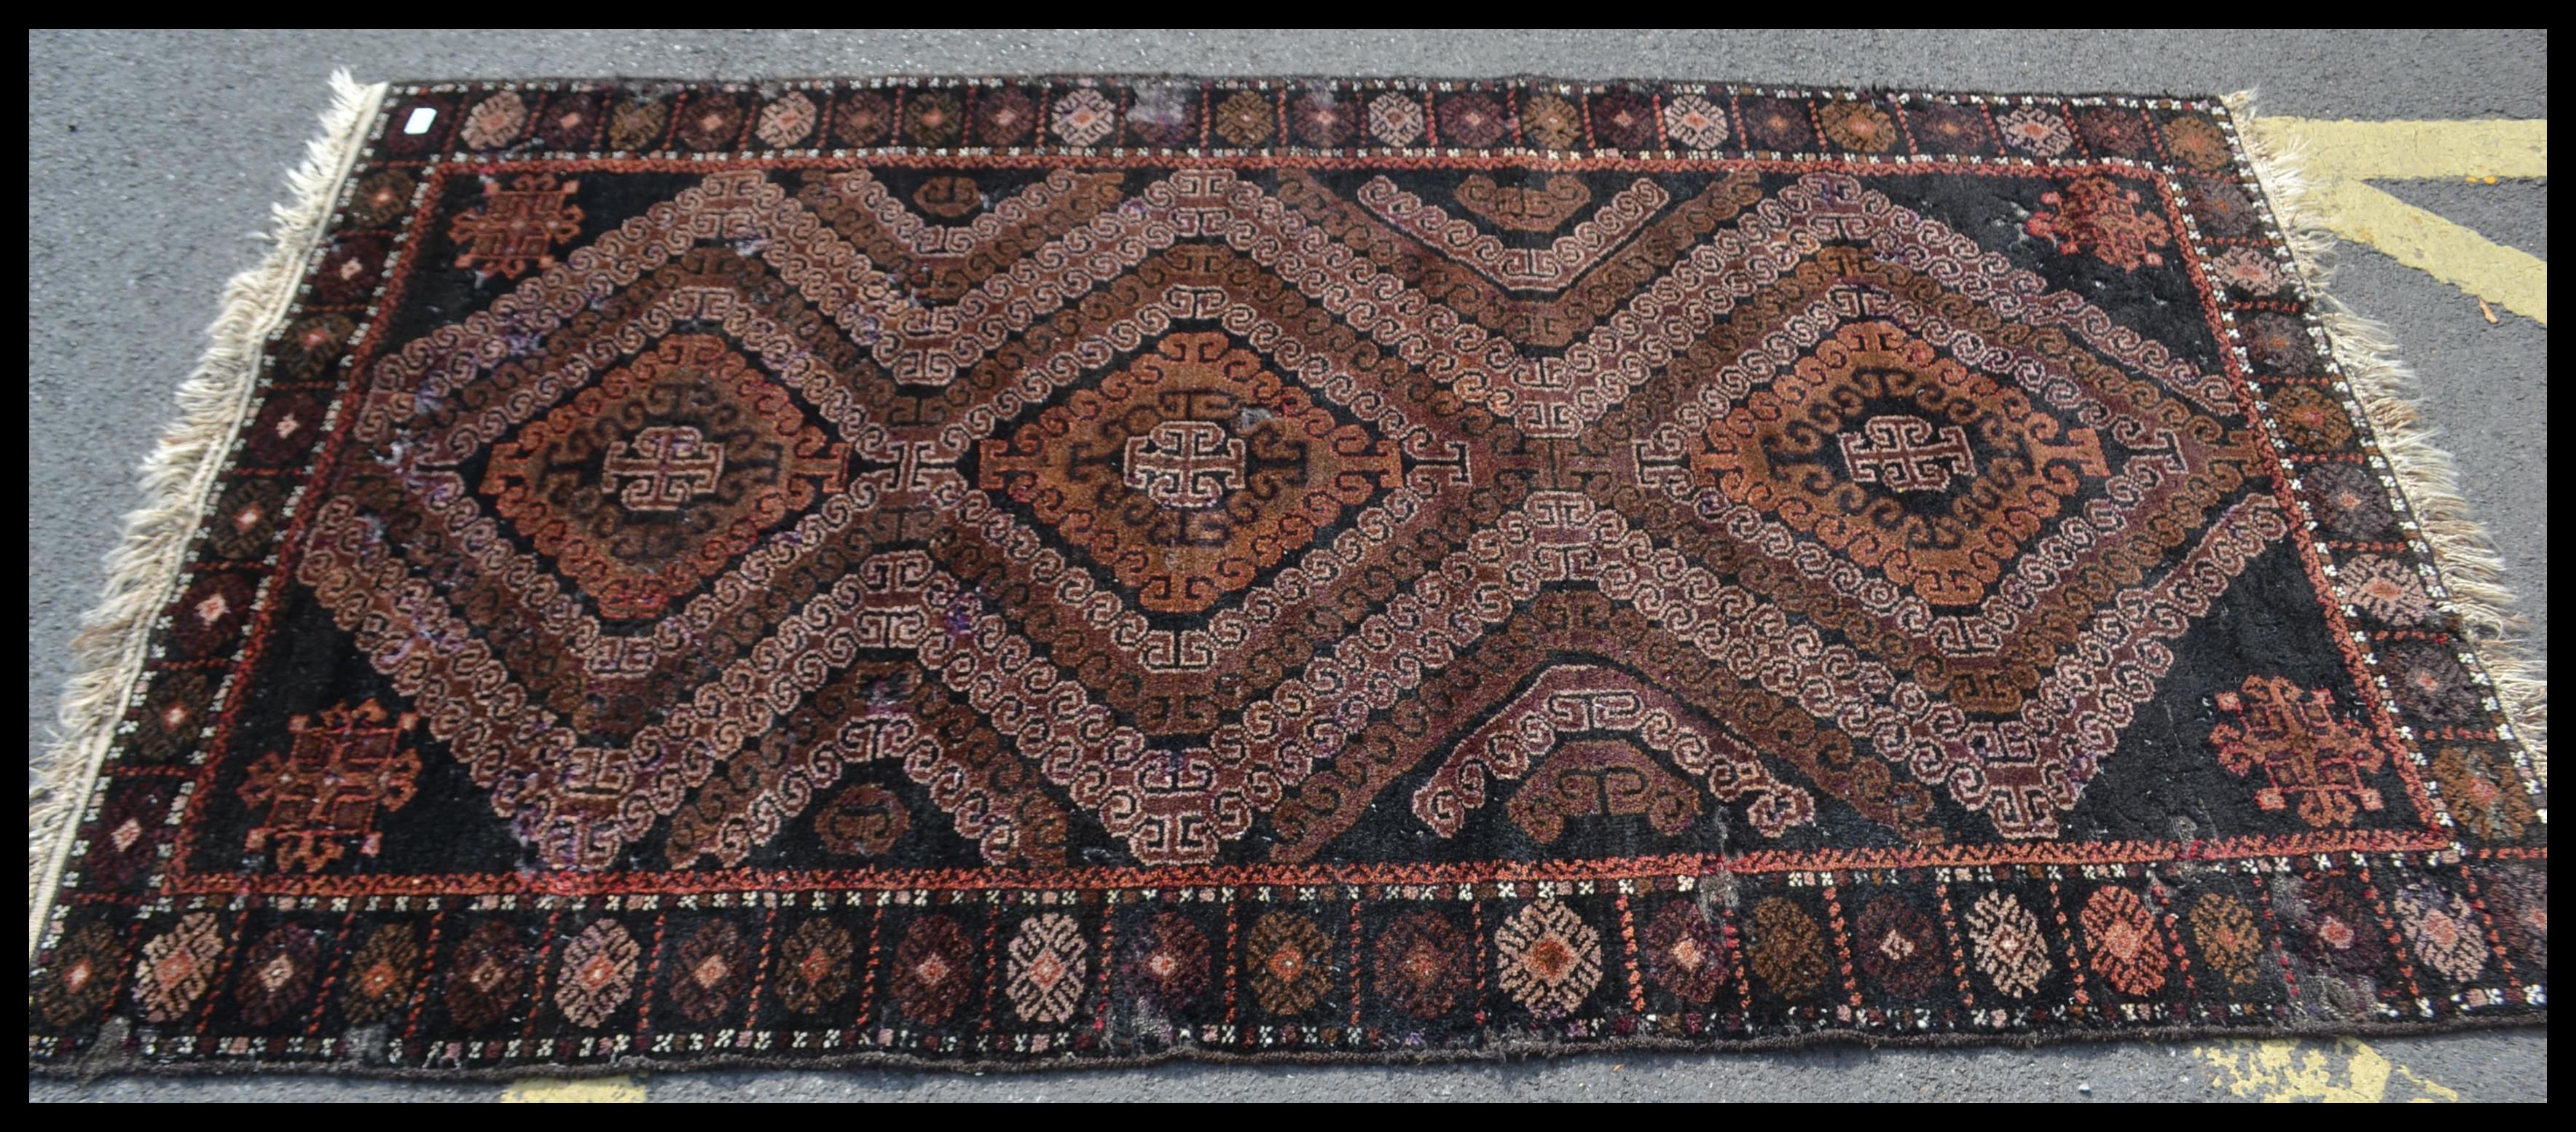 An early 20th Century Middle Eastern floor rug on